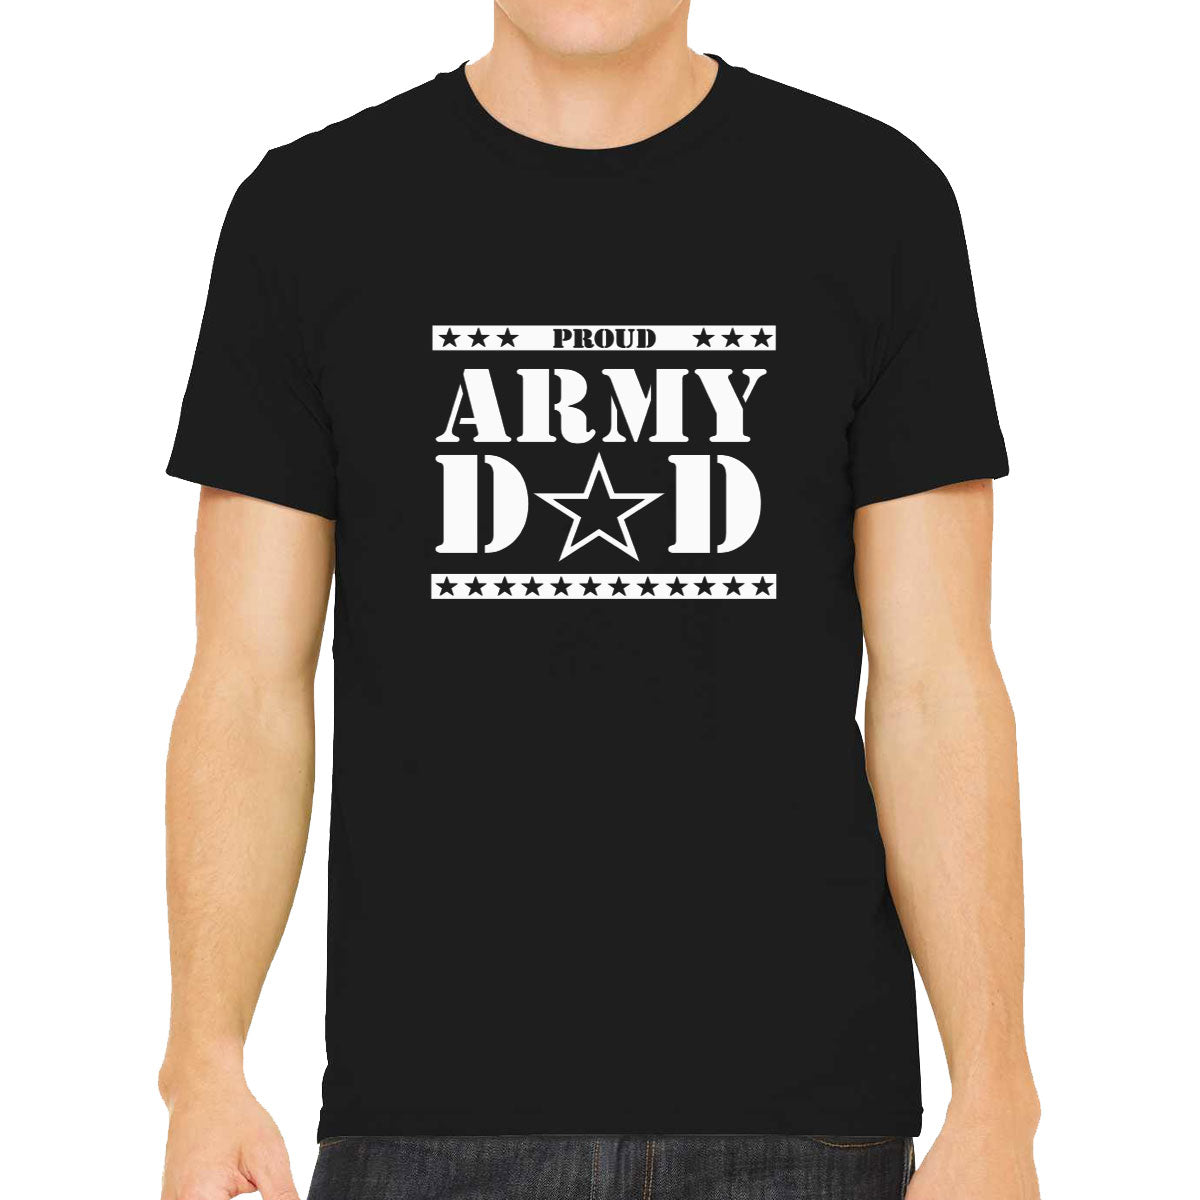 Army Dad Men's T-shirt